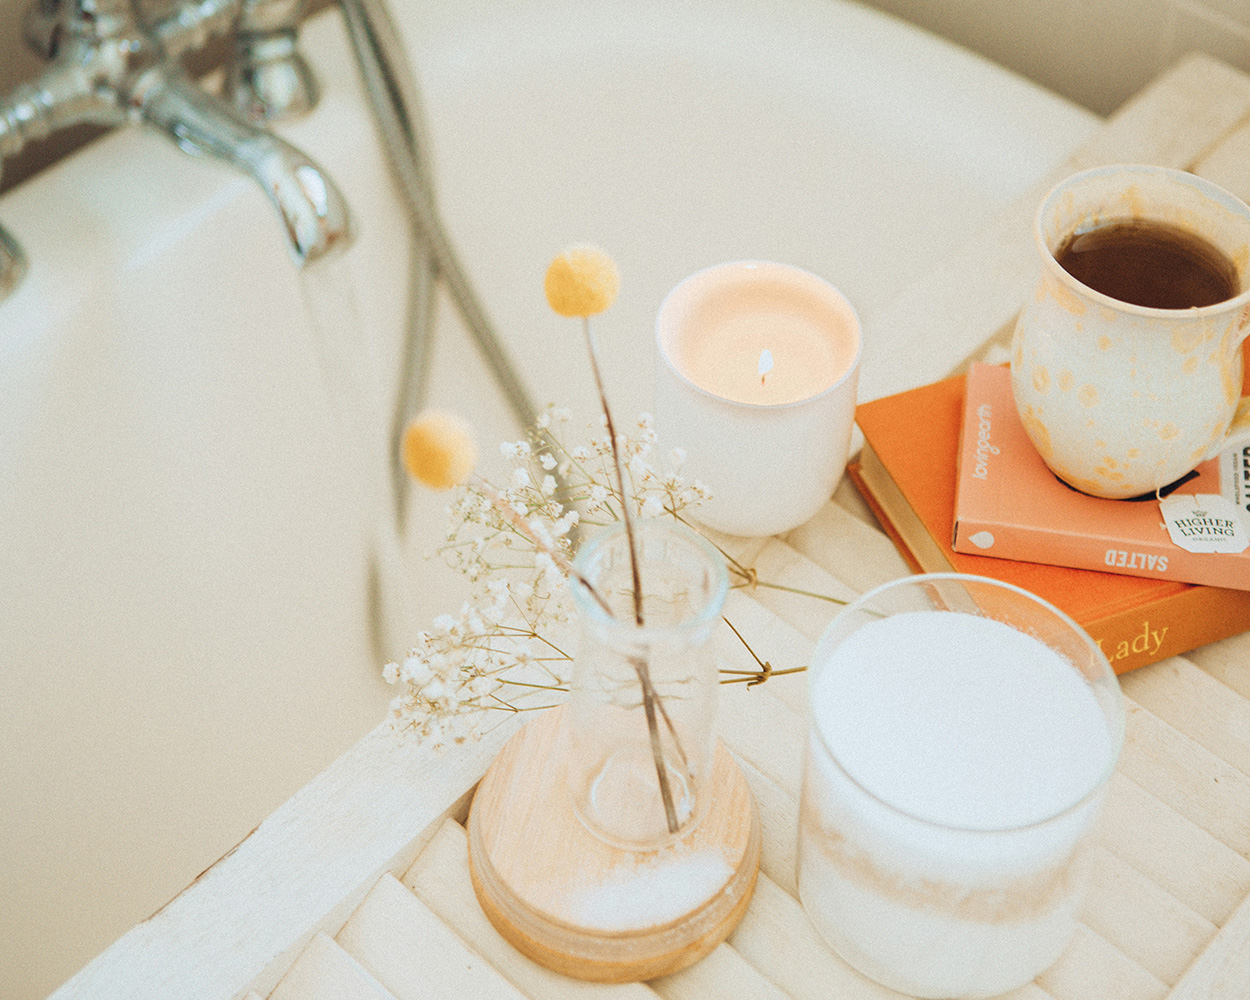 Bathtub with candles, flower in vase, and mug of tea sitting on two books.